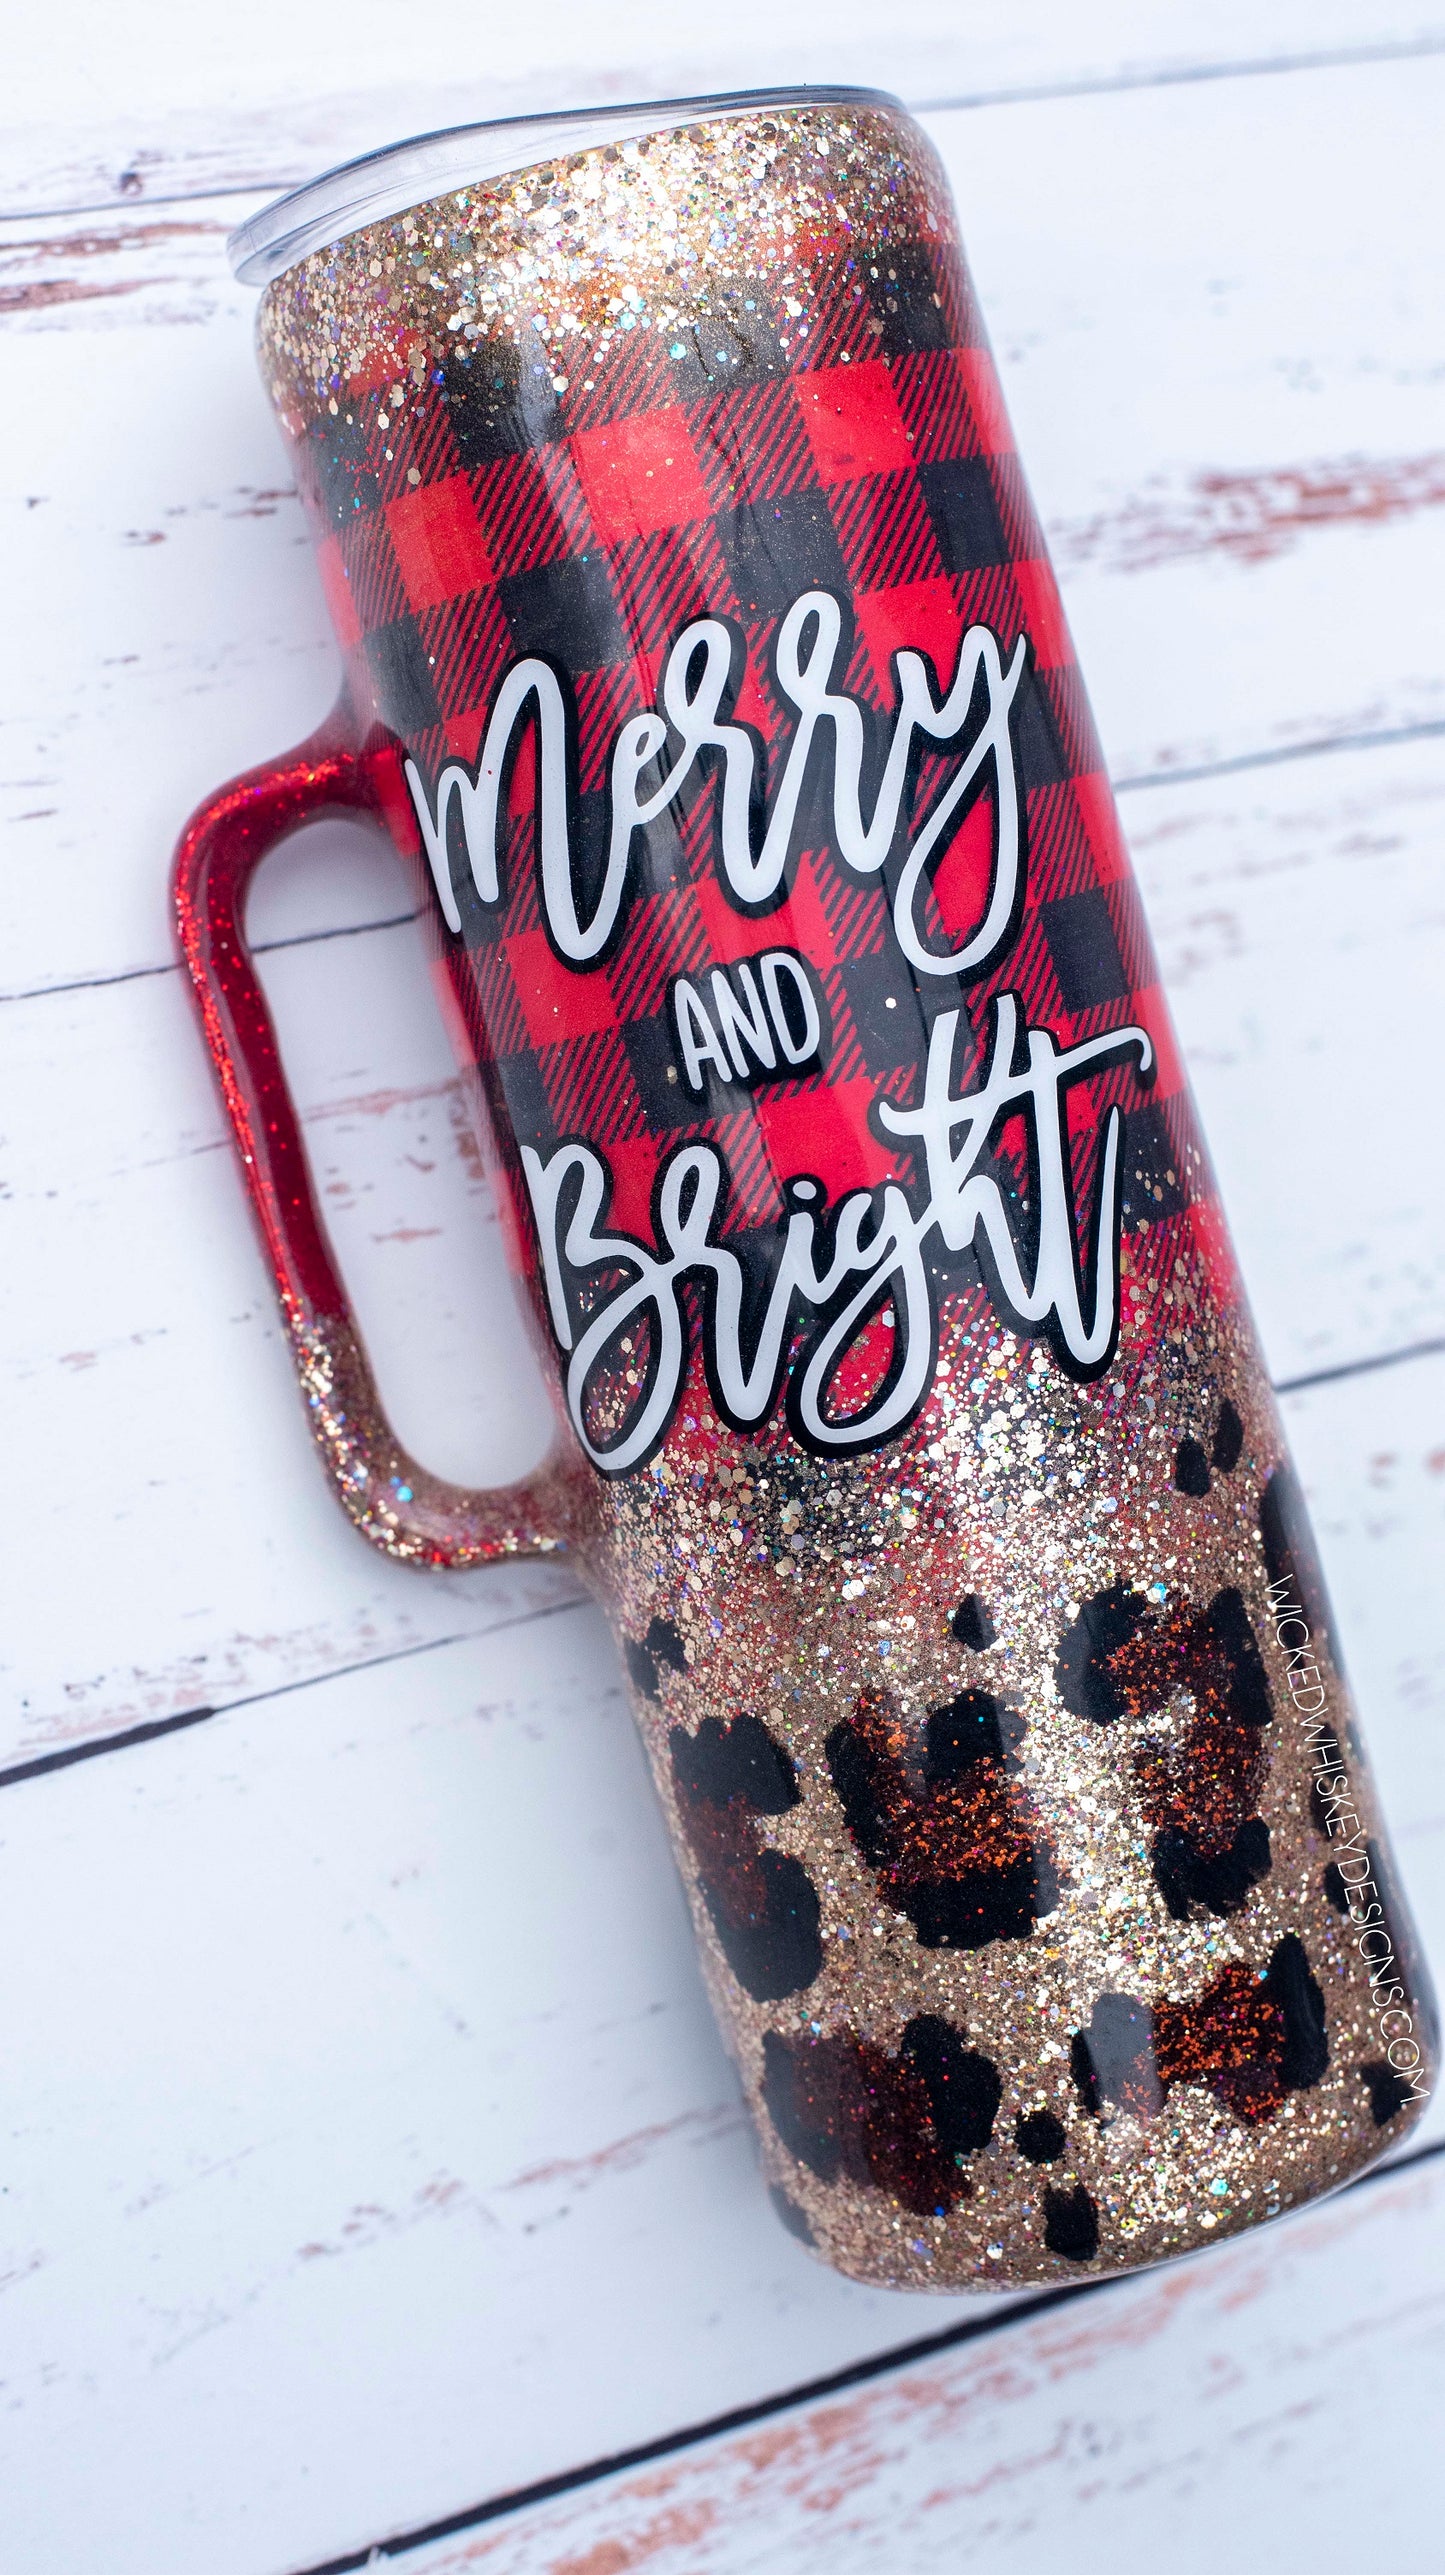 ABCDEFU Leopard Glitter Tumbler  Personalized Tumblers – Wicked Whiskey  Designs